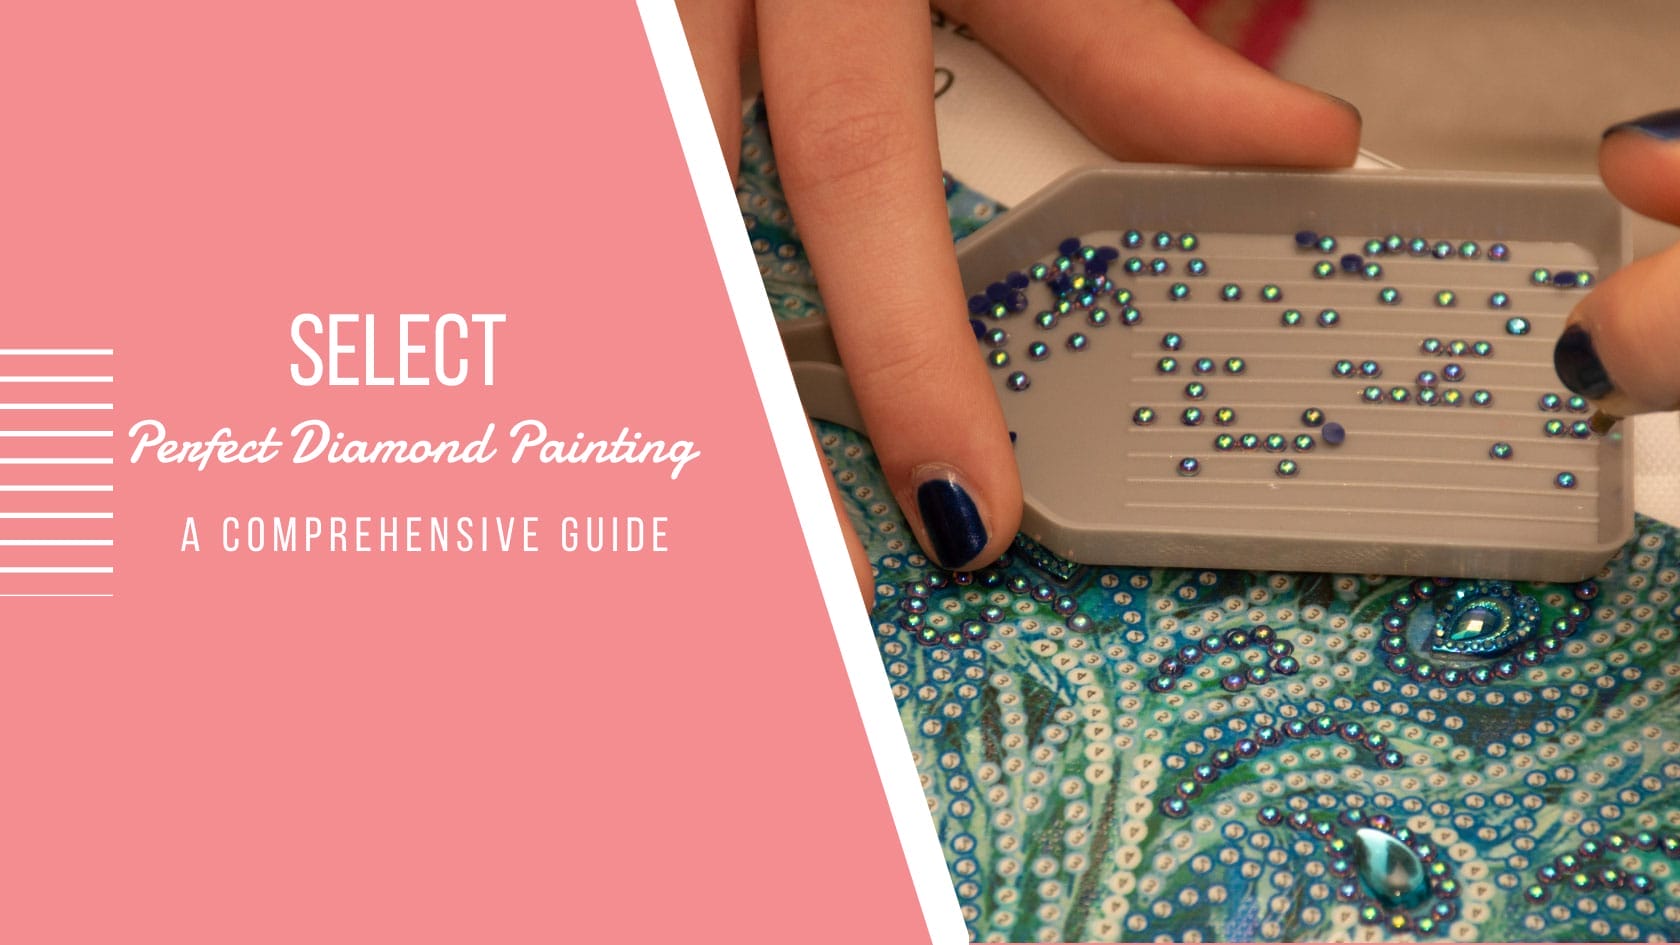 How to Choose the Right Diamond Painting Kit for Your Skill Level